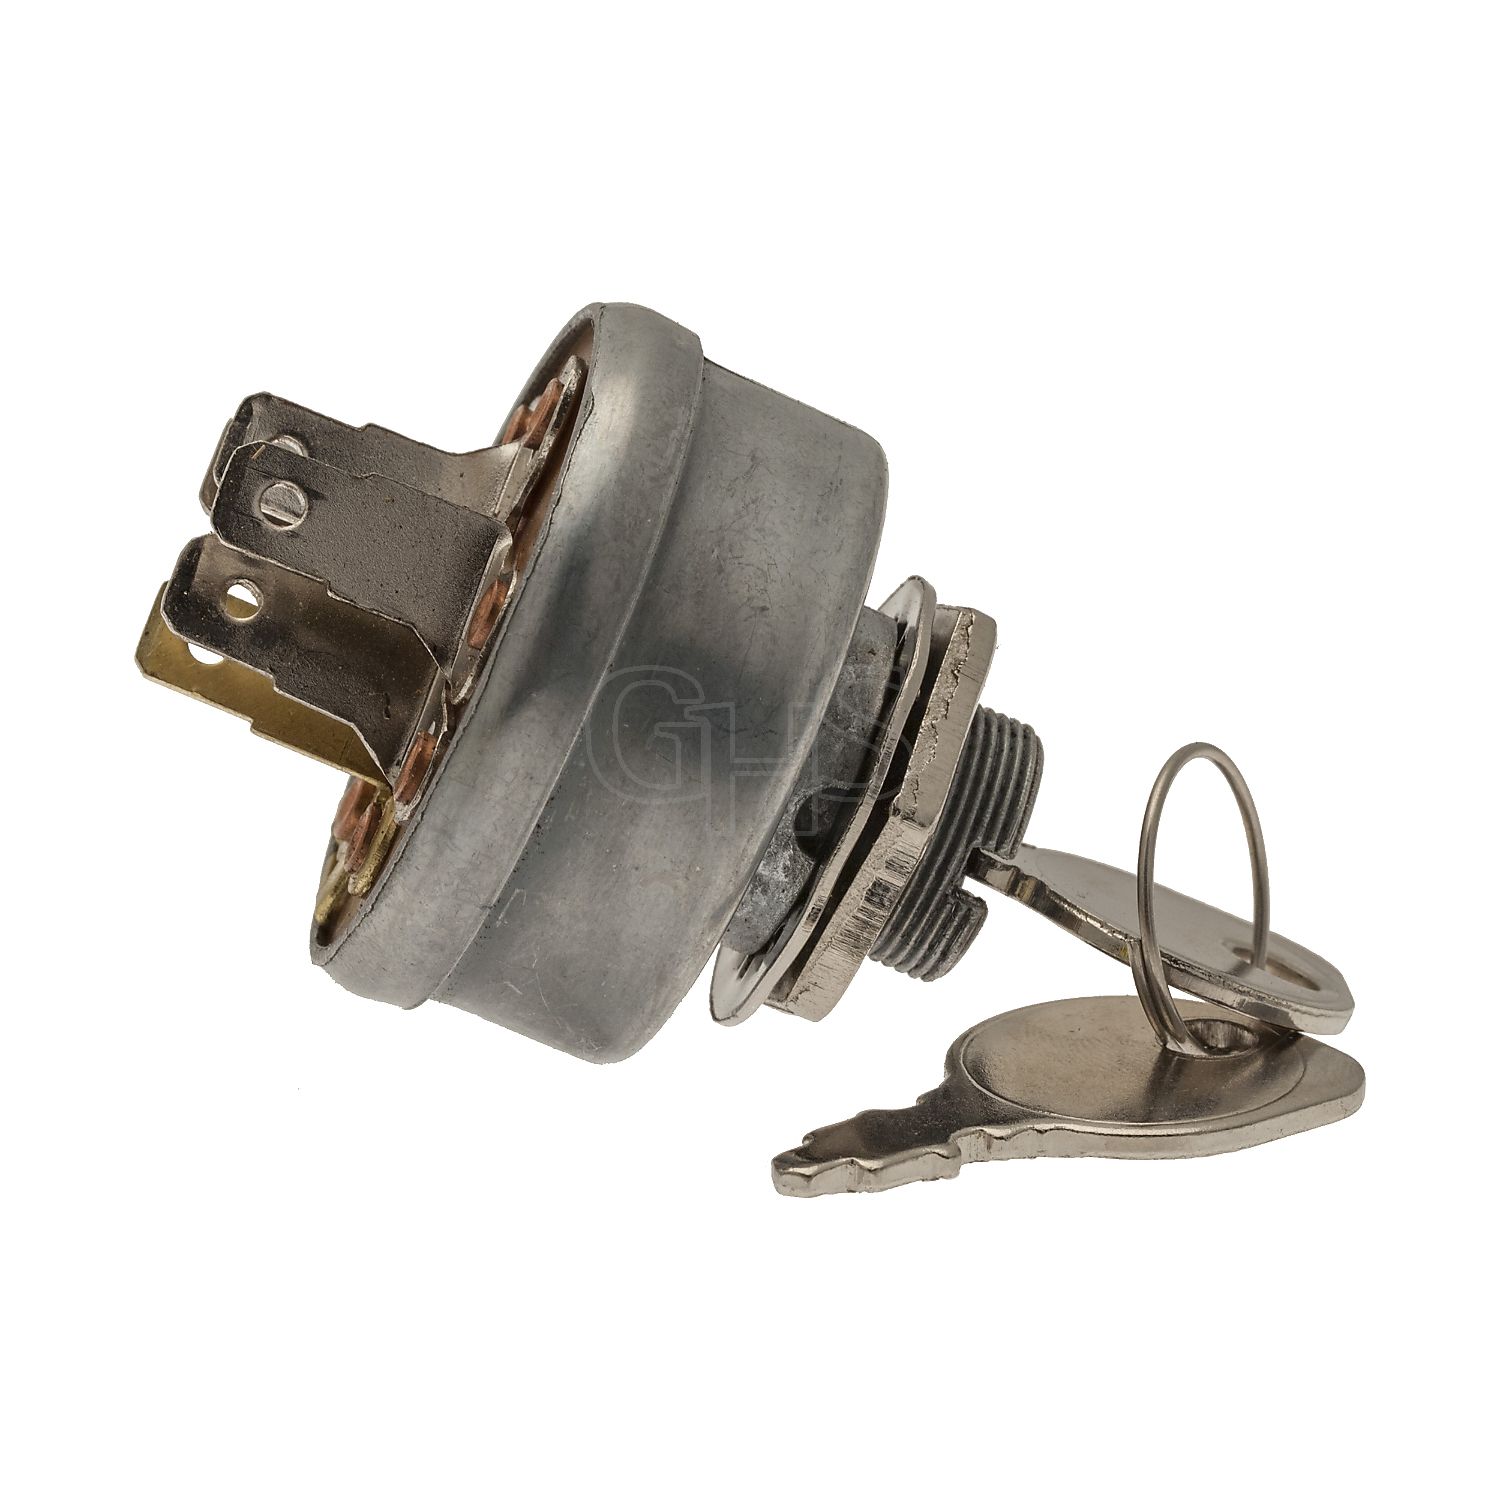 6 Spade Terminal Countax Ignition Switch Fits Westwood Scag & Many More 